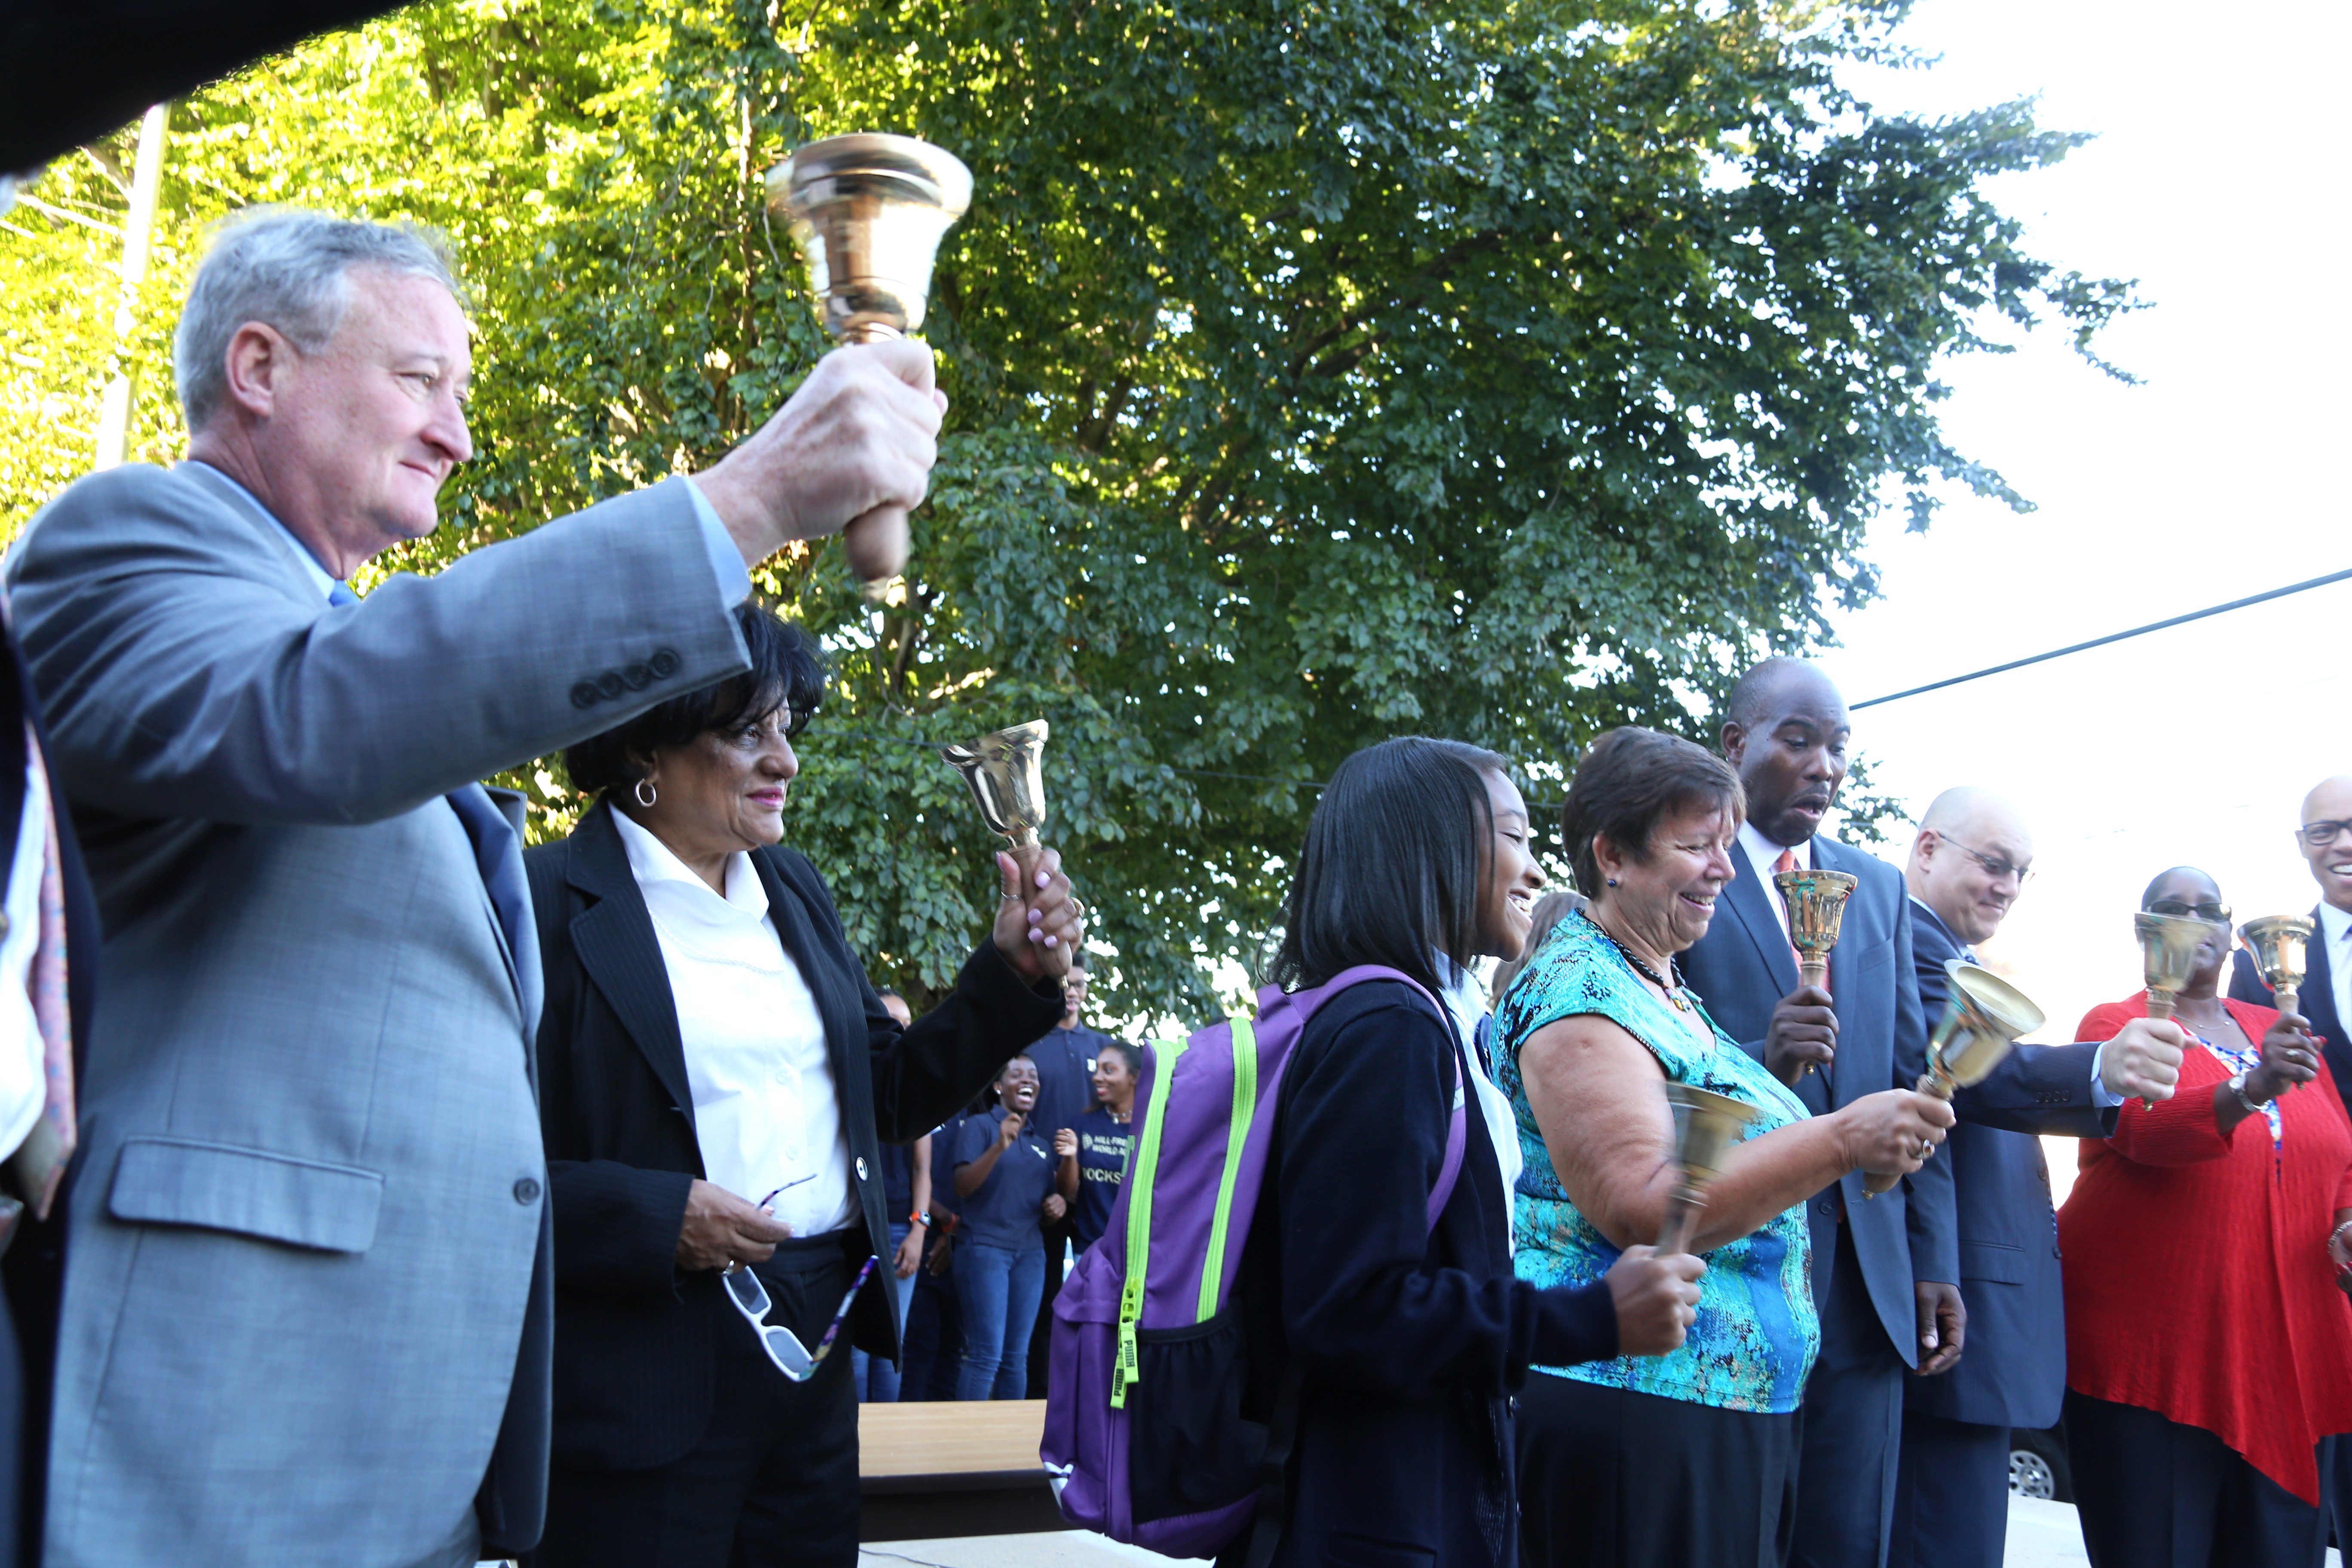 Mayor Kenney rings a big golden bell alongside City Council members, teachers, and City officials.